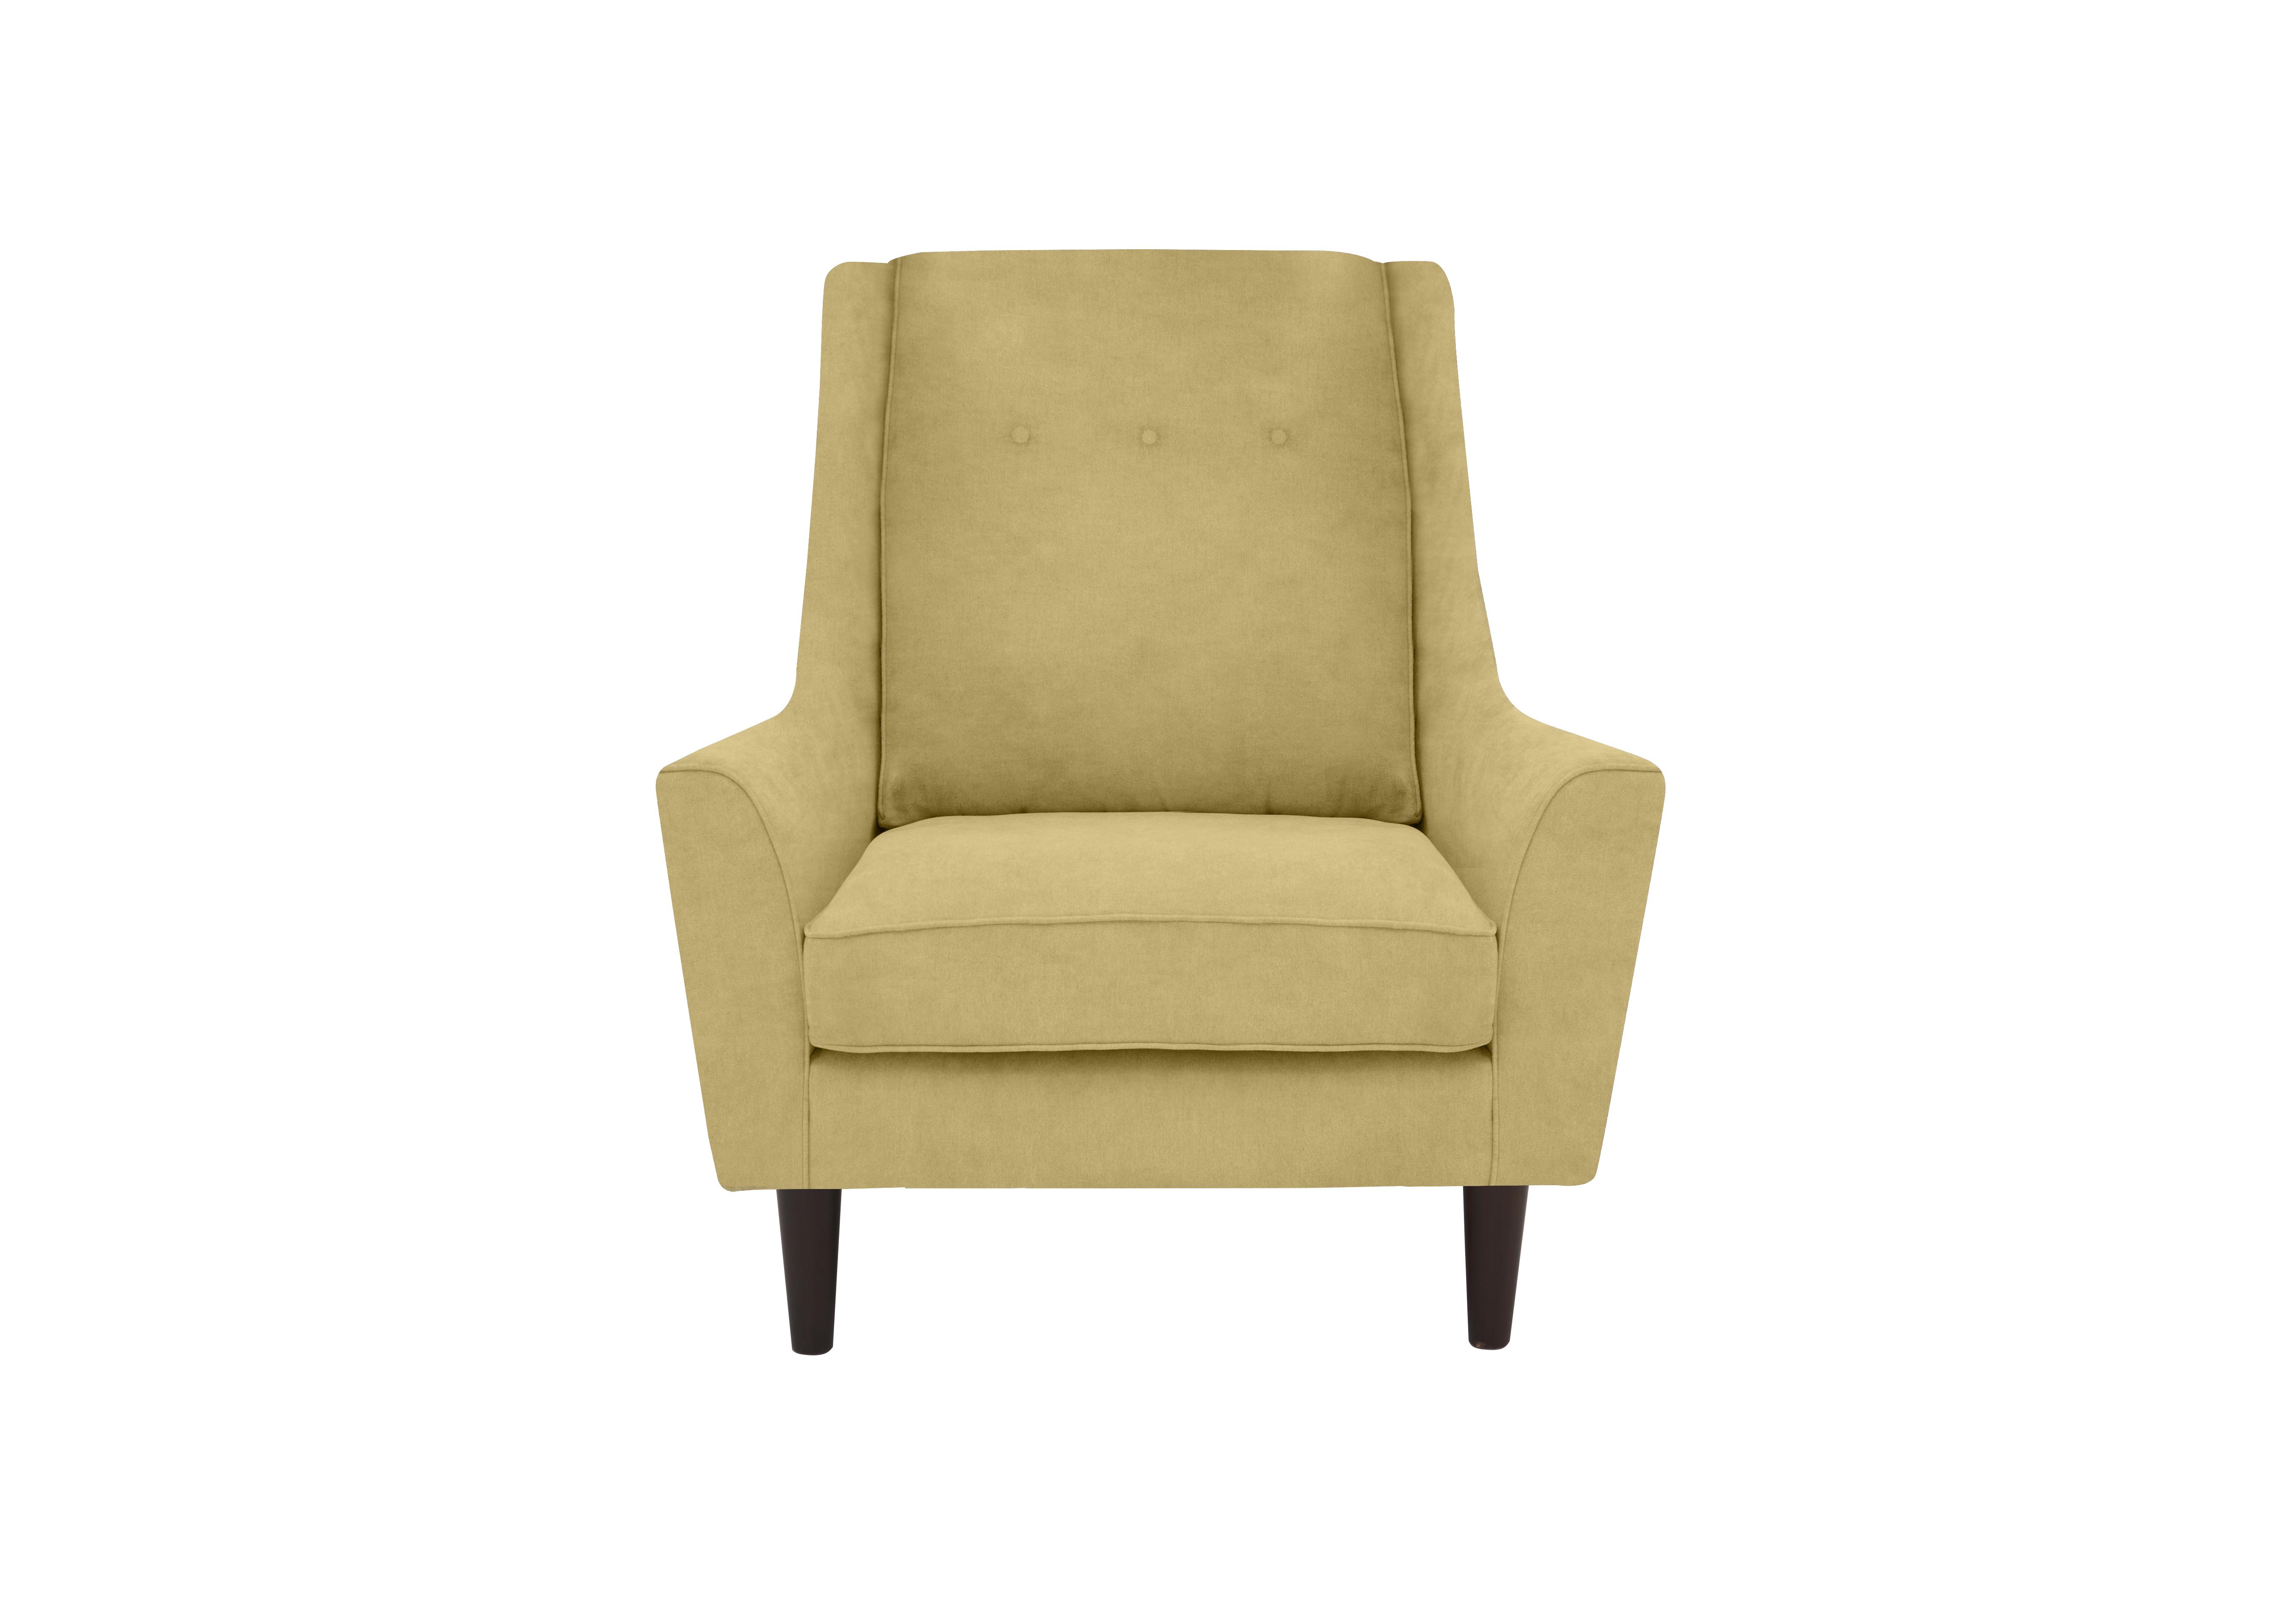 Legend Fabric Designer Accent Chair in Cosmo Apple on Furniture Village